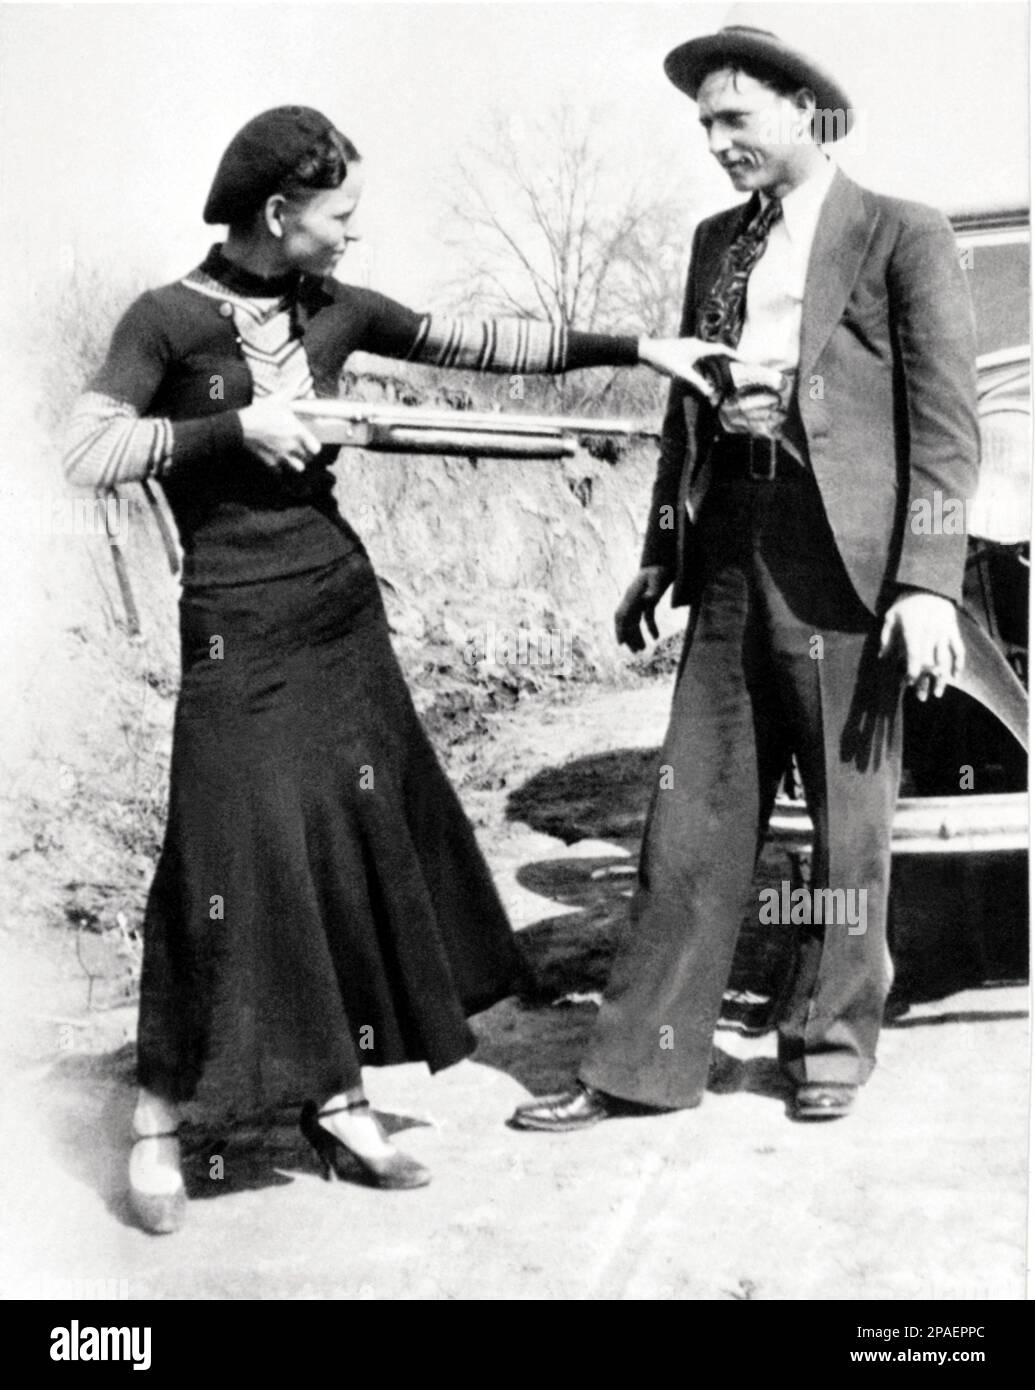 1932  , 23 may , Arkansas , USA : The two most celebrated gangstern BONNIE PARKER ( 1910 - 1934 ) and CLYDE BARROW  ( 1909 - 1934 ) . Were notorious outlaws, robbers and criminals who travelled the Central United States during the Great Depression. Their exploits were known nationwide. They captured the attention of the American press and its readership during what is sometimes referred to as the "public enemy era" between 1931 and 1935. Although this couple and their gang were notorious for their bank robberies, Clyde Barrow preferred to rob small stores or gas stations.- portrait - ritratto Stock Photo